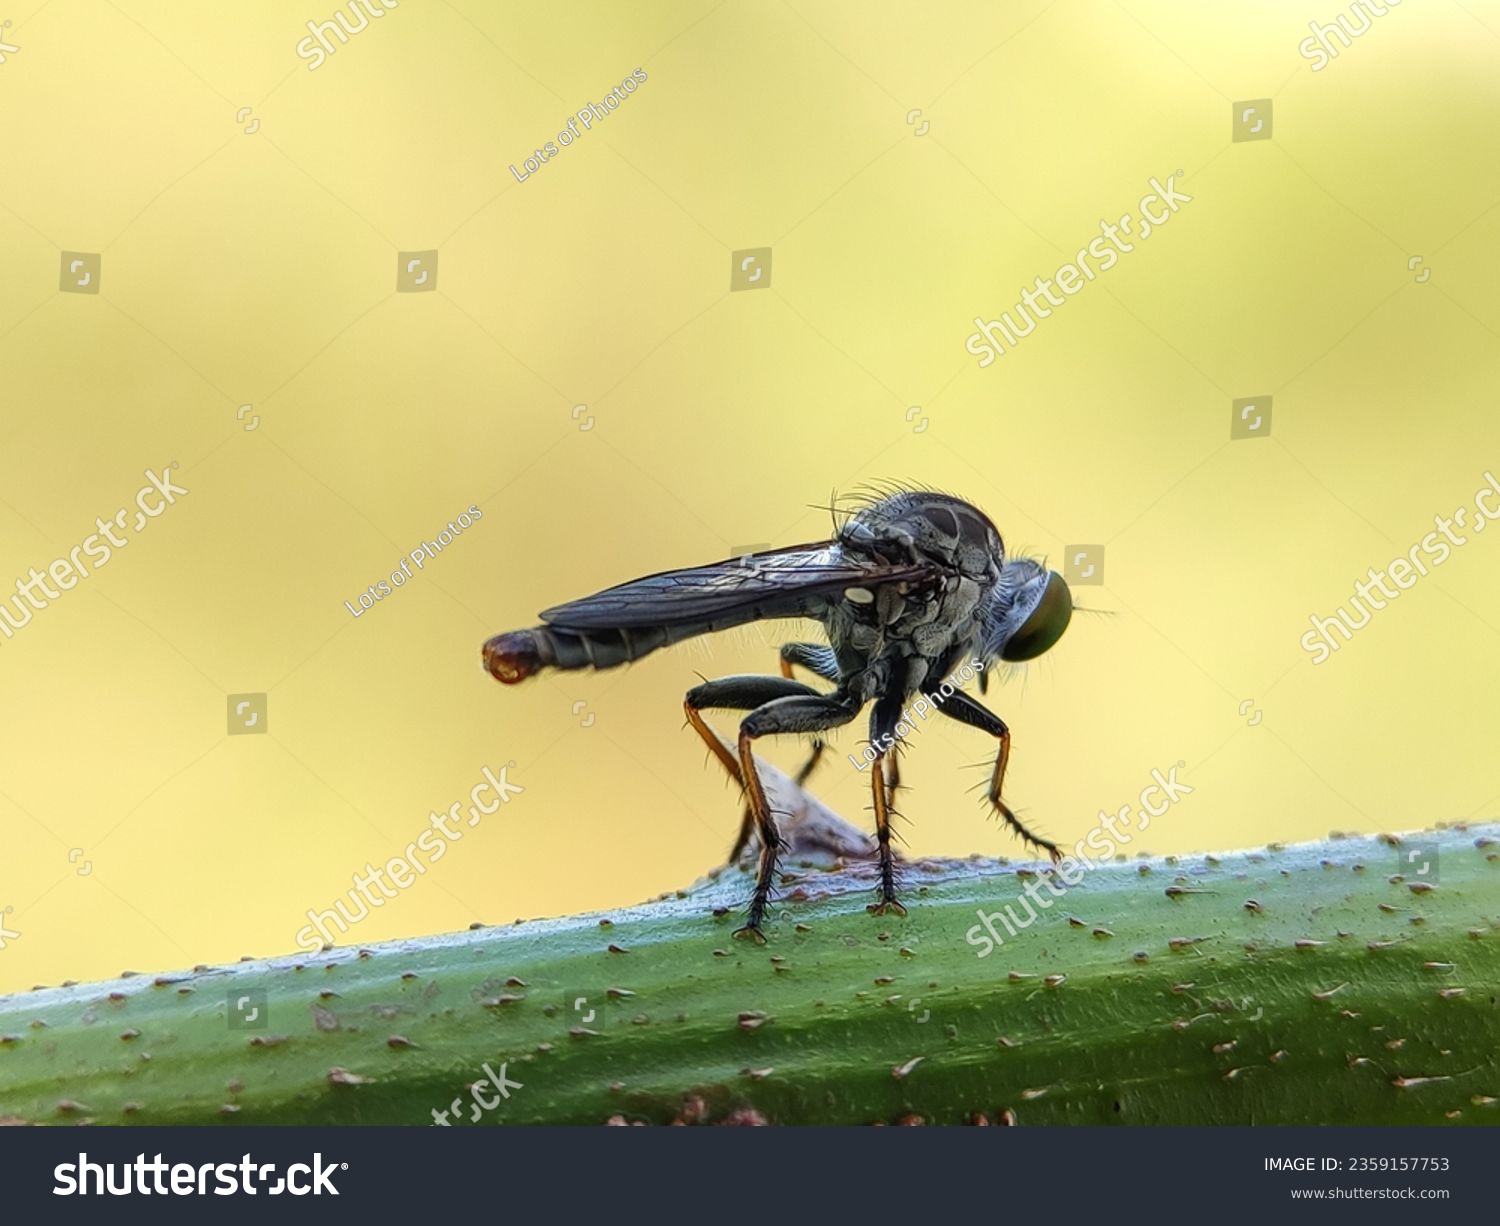 Macro photography of a robber fly. The Asilidae are the robber fly family, also called assassin flies. Robber Fly Standing on a twig. #2359157753